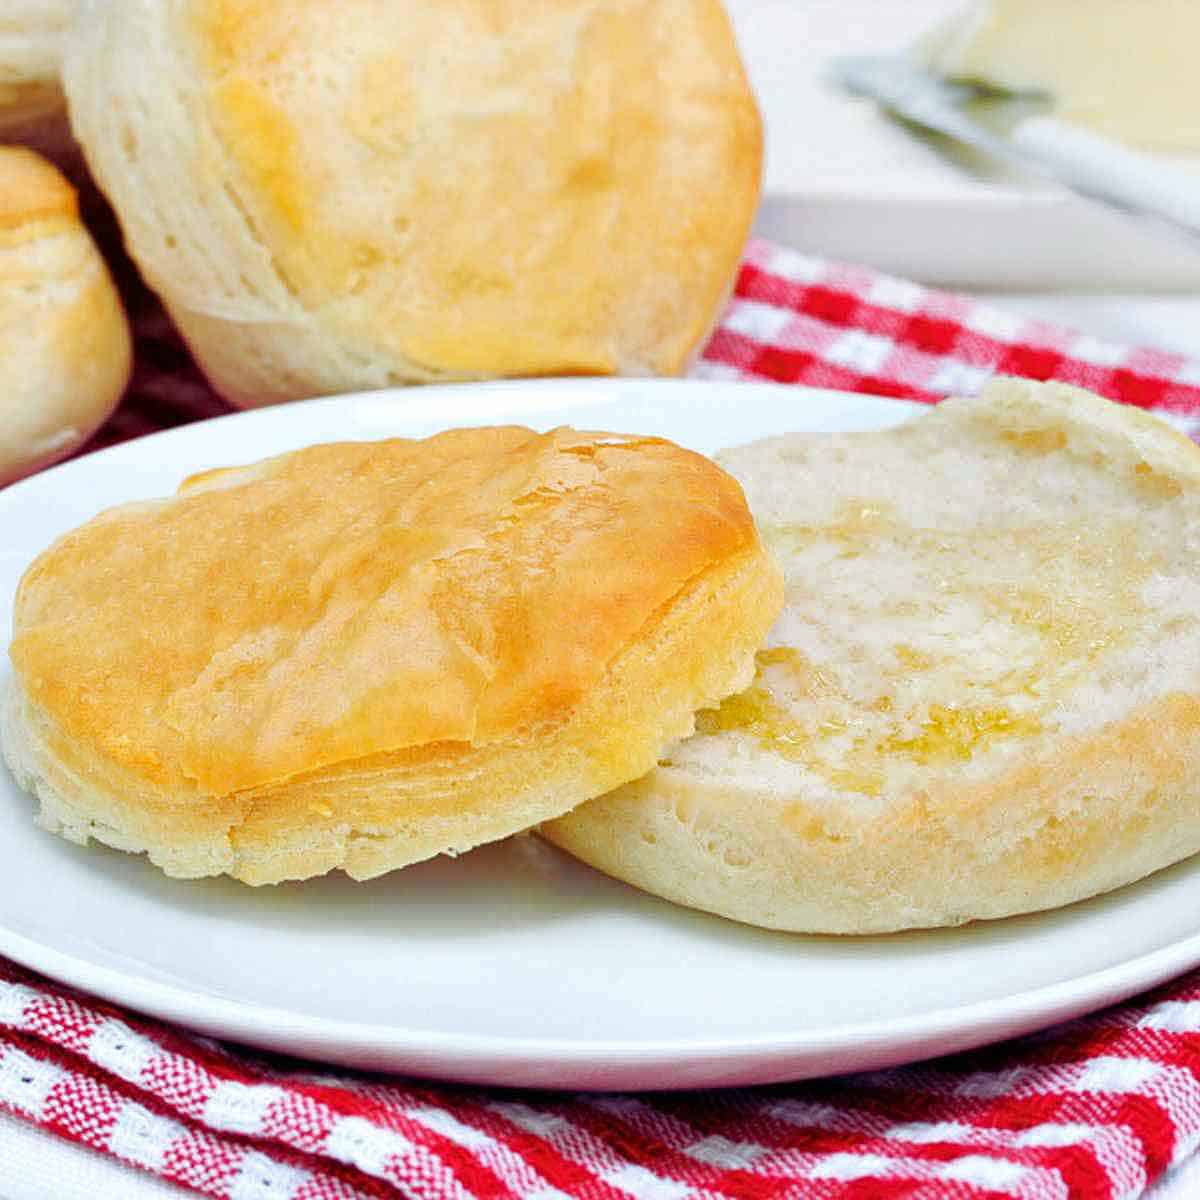 A warm biscuit cut in half and spread with butter.